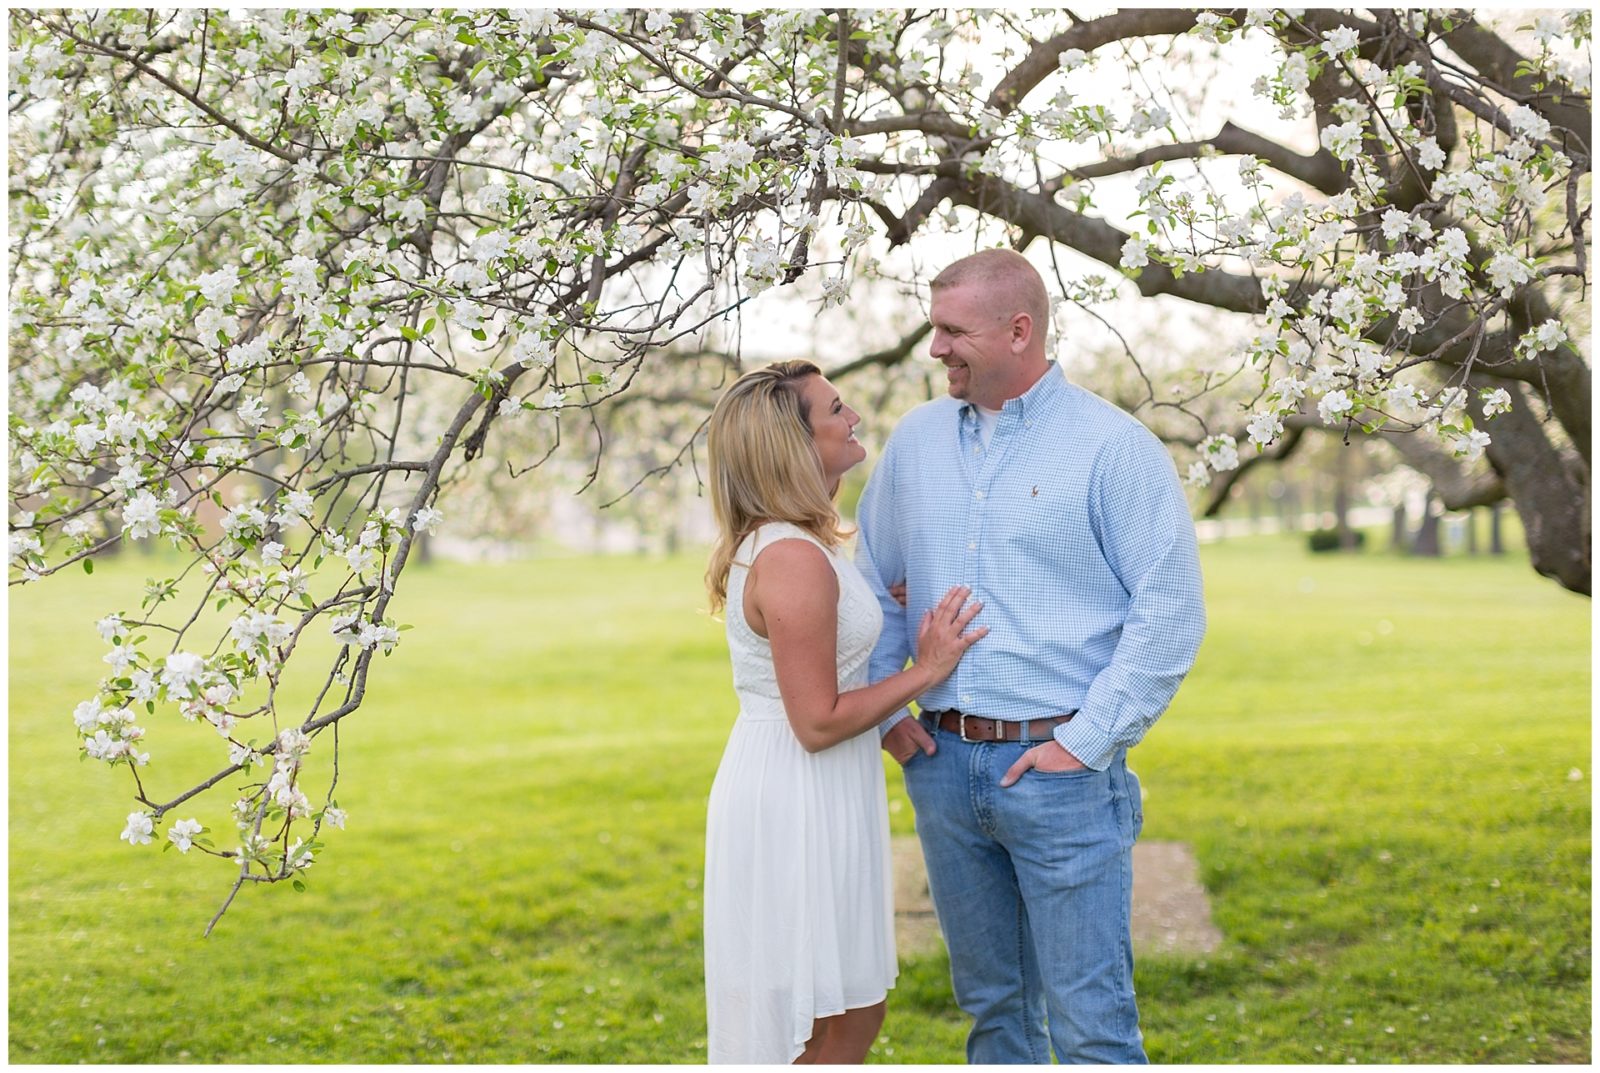 Spring Engagement Photos at Keeneland in Lexington , Kentucky. Photo by: Kevin and Anna Photography